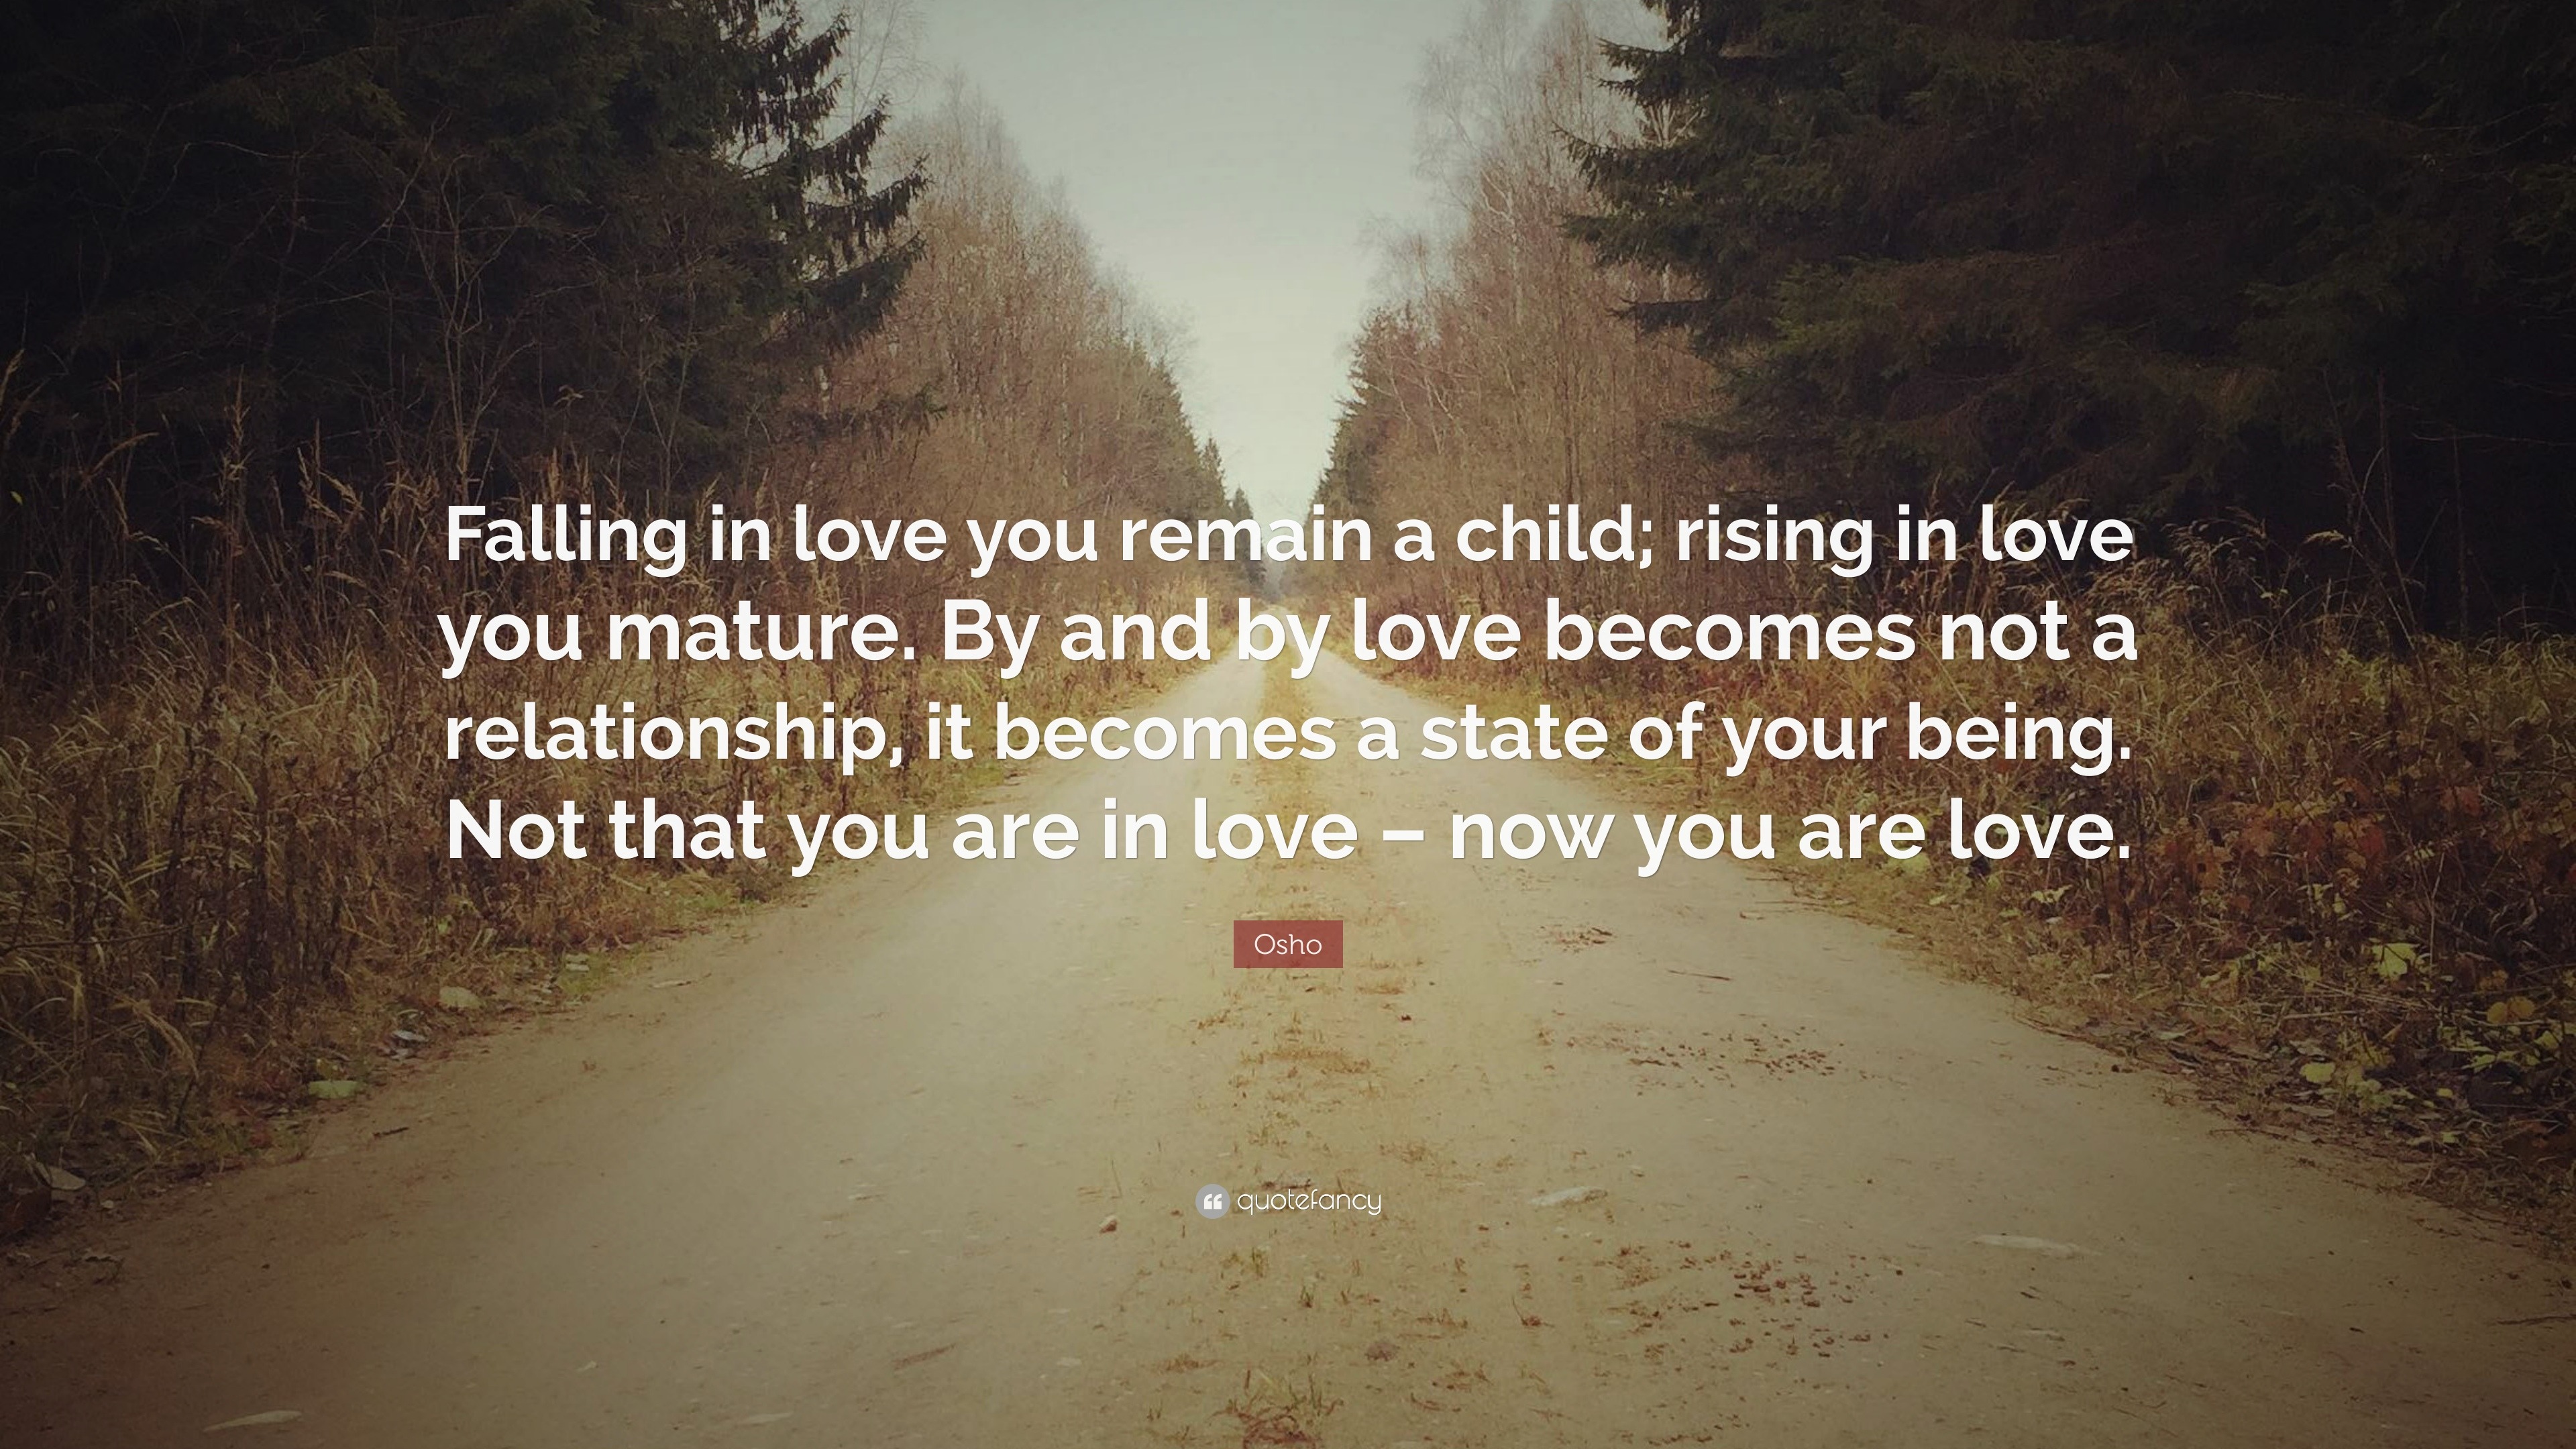 Osho Quotes (26 wallpapers) - Quotefancy